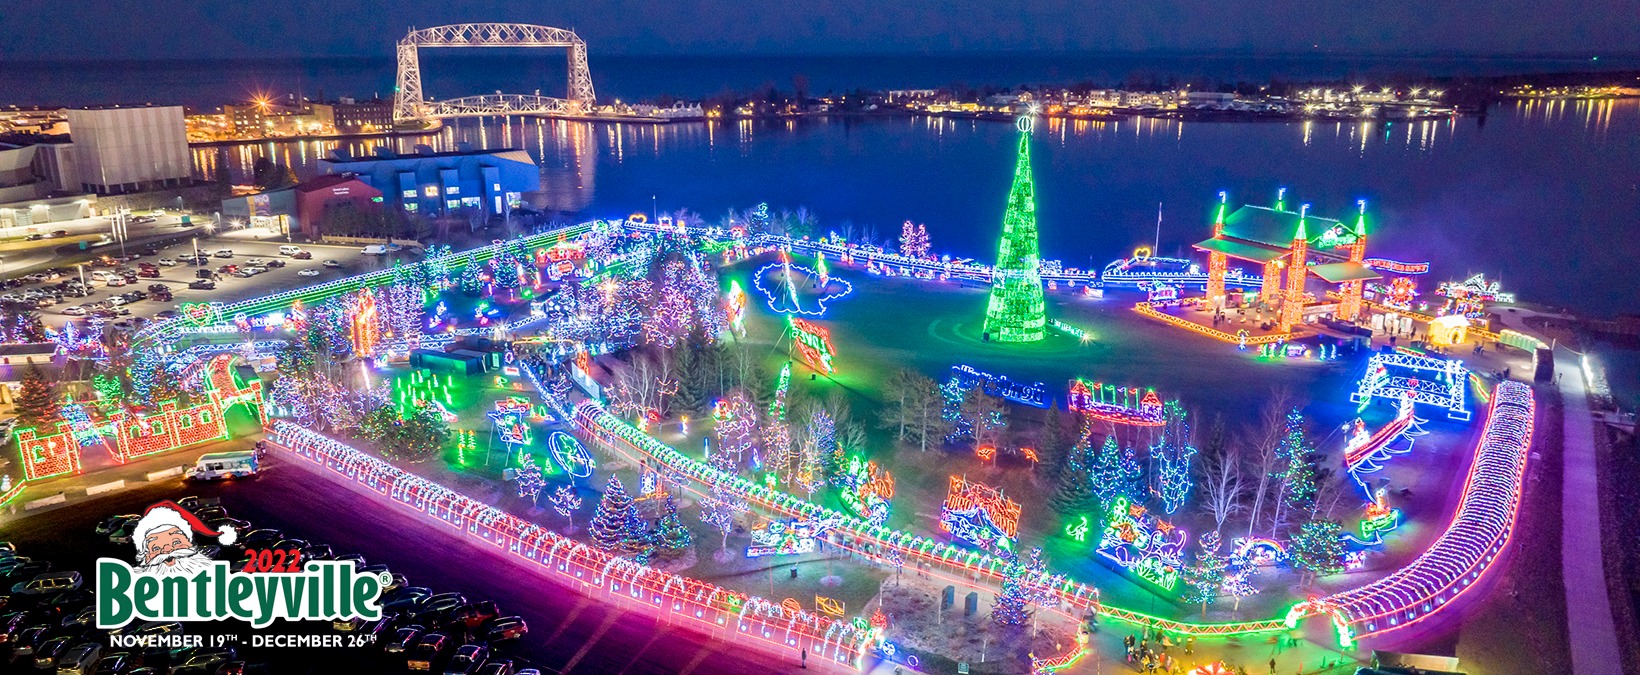 Live Look Opening Night At 'Bentleyville Tour Of Lights'